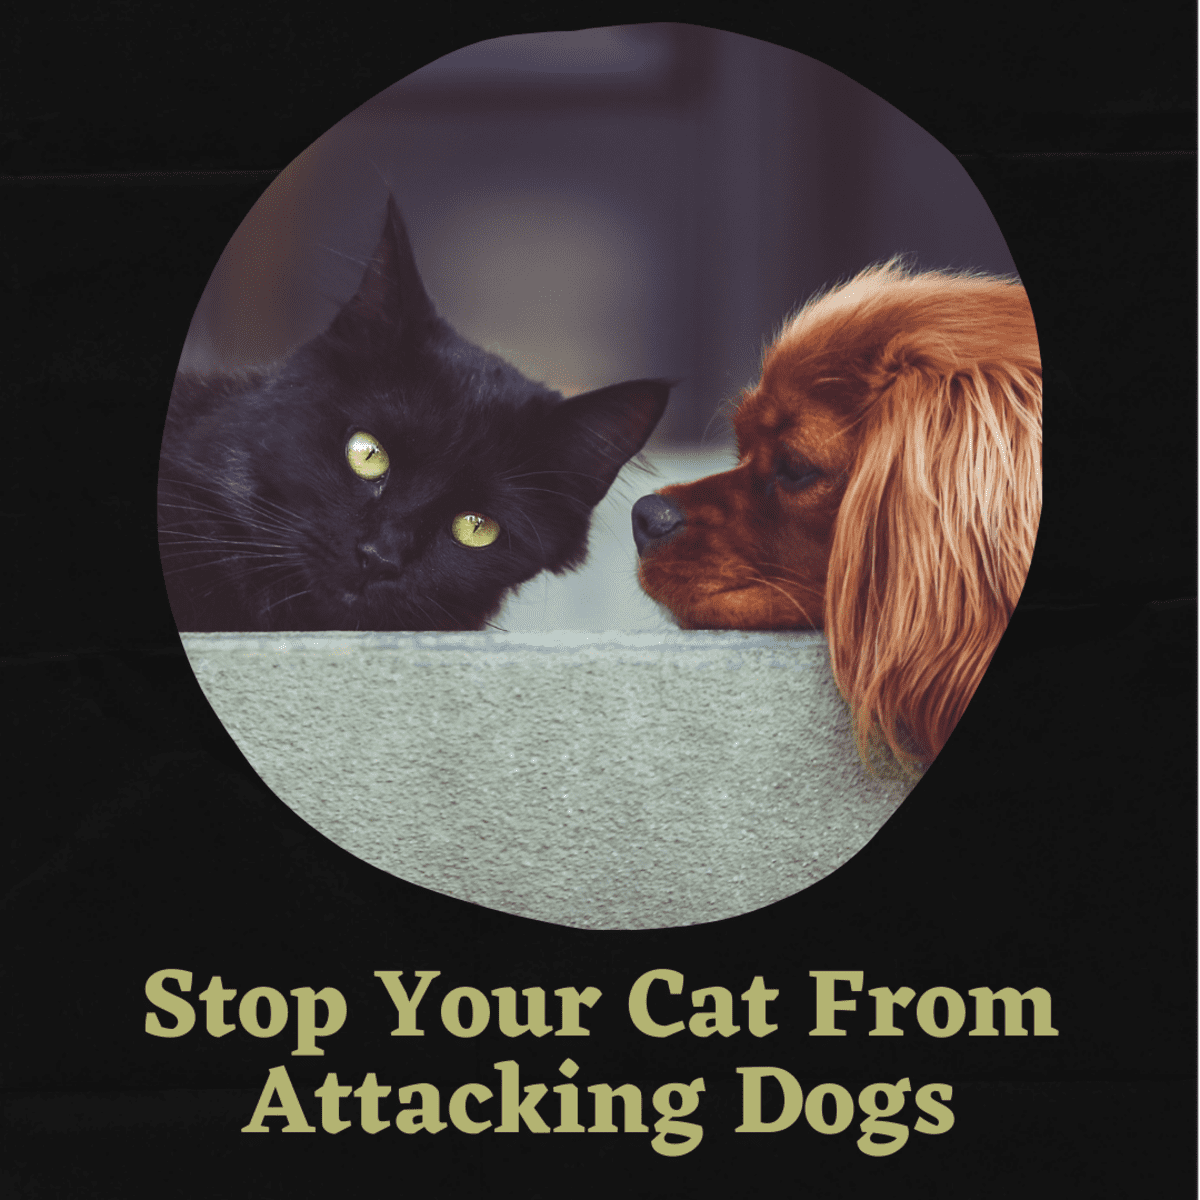 how do i get my cat to stop hitting the dog